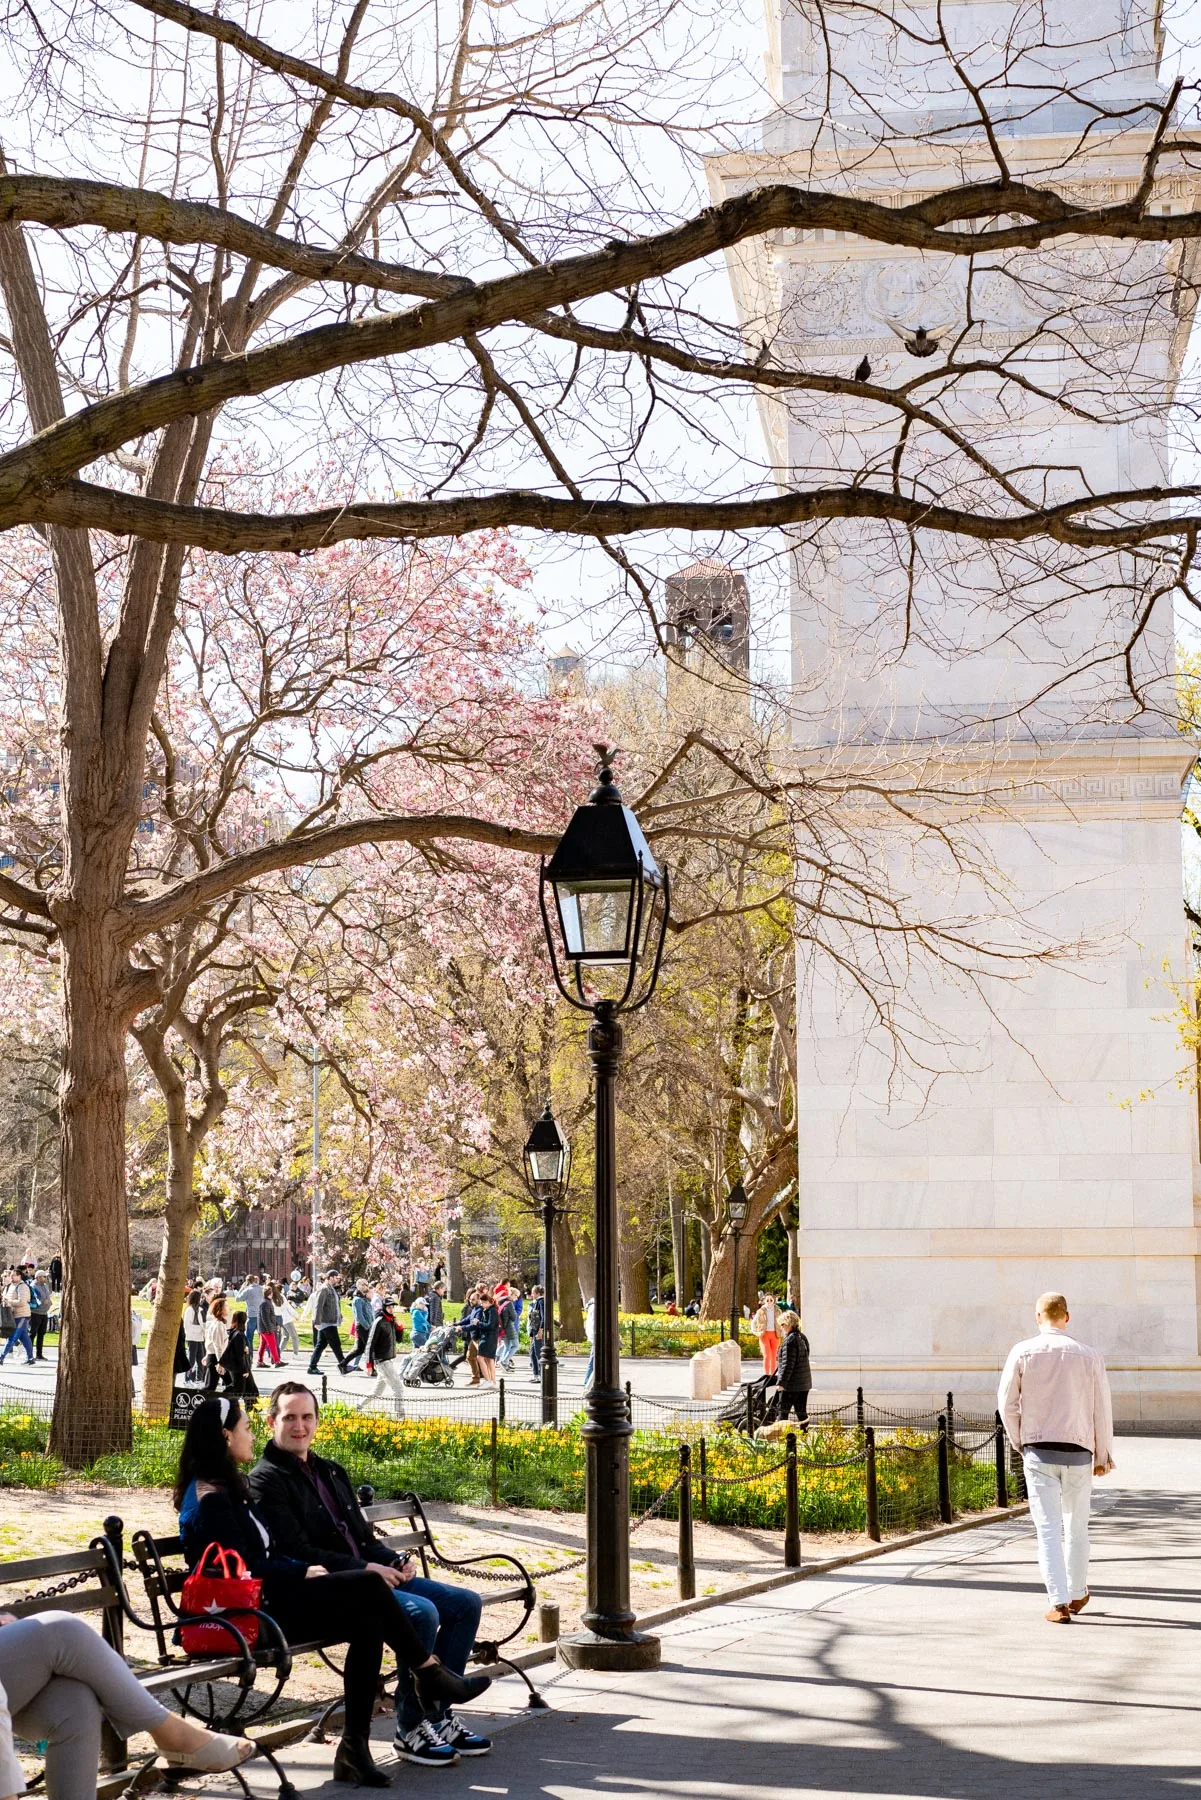 Washington Square Park in the spring